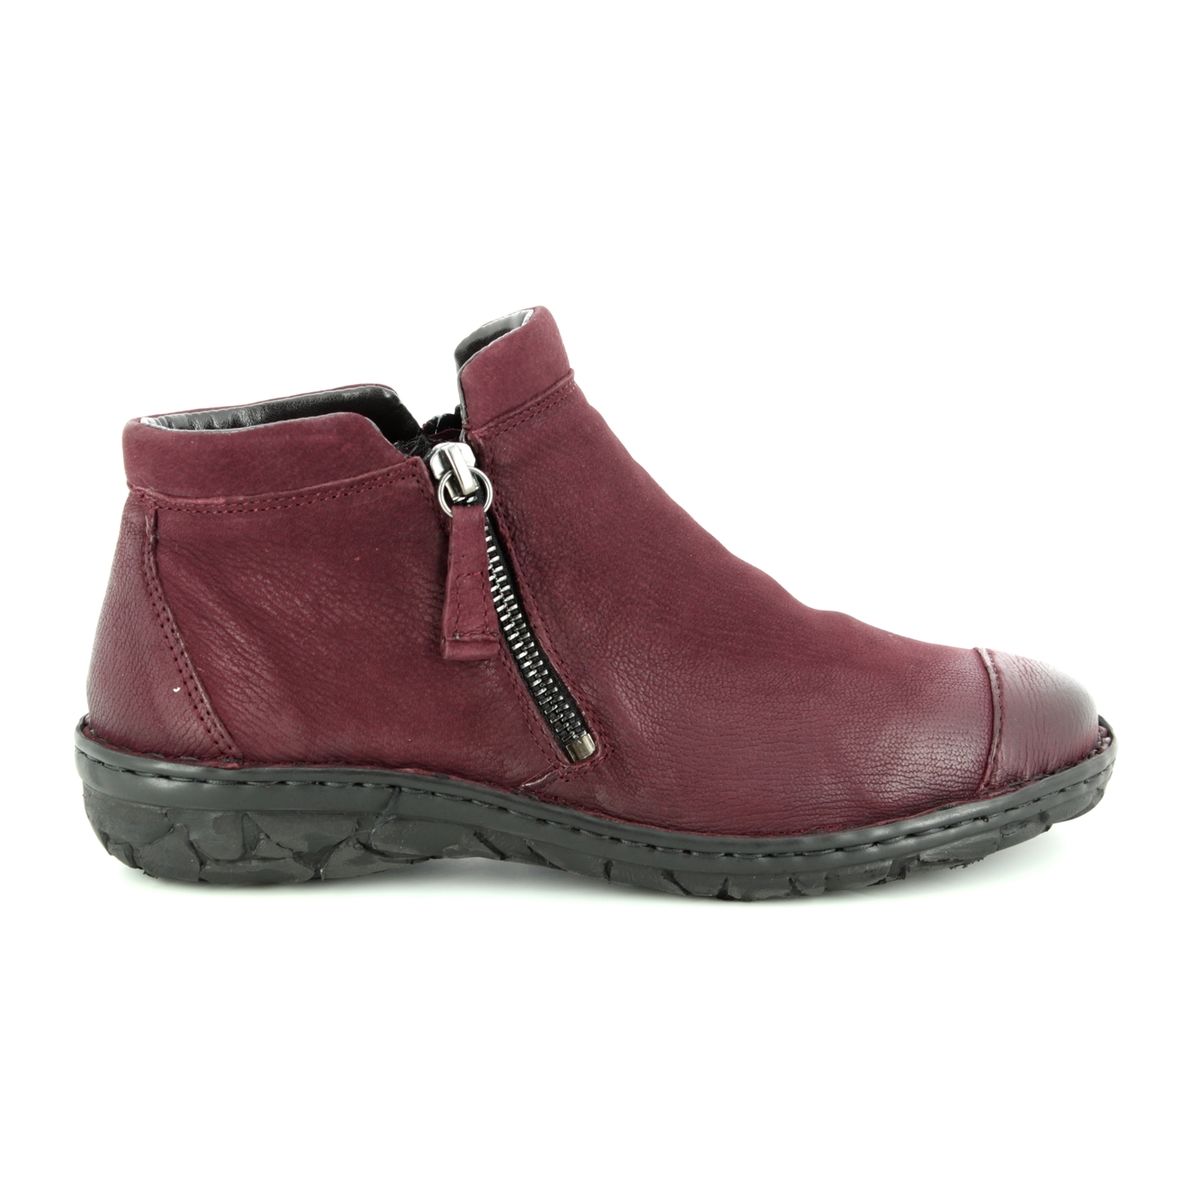 Relaxshoe Suffcap 26759-81 Wine leather ankle boots